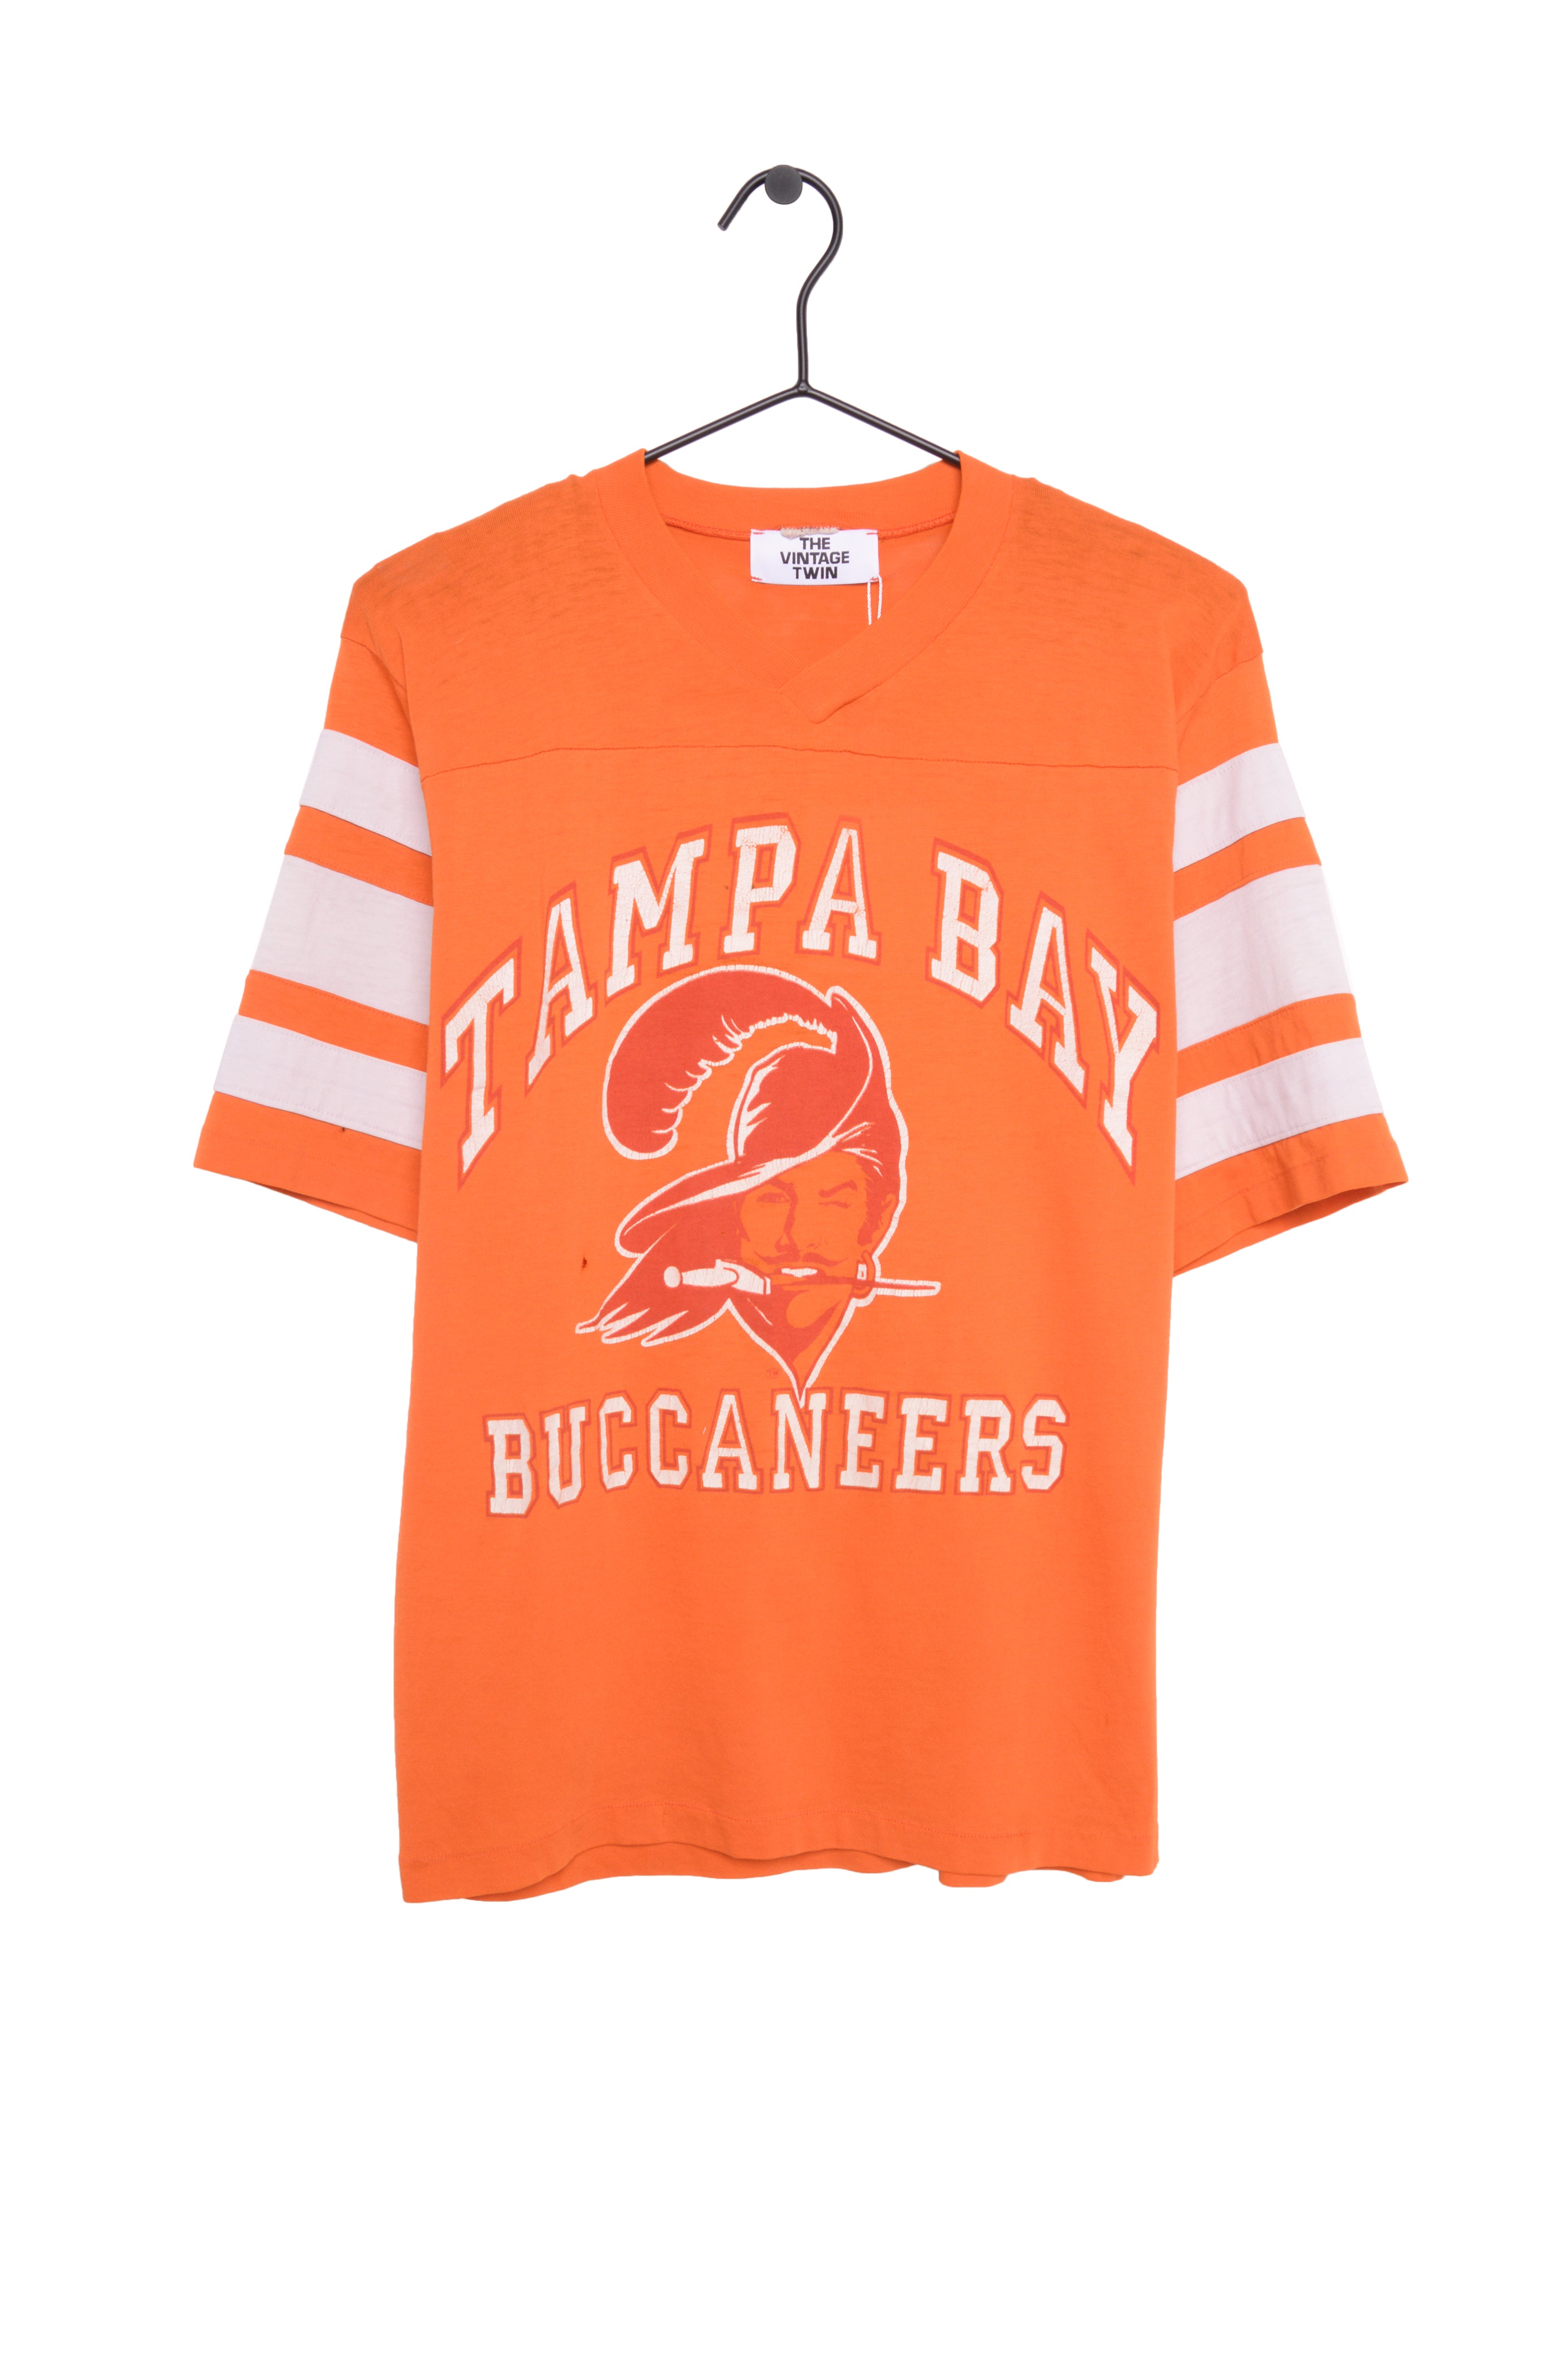 Tampa Bay's new third jersey: Shades of 1990 or do you like the